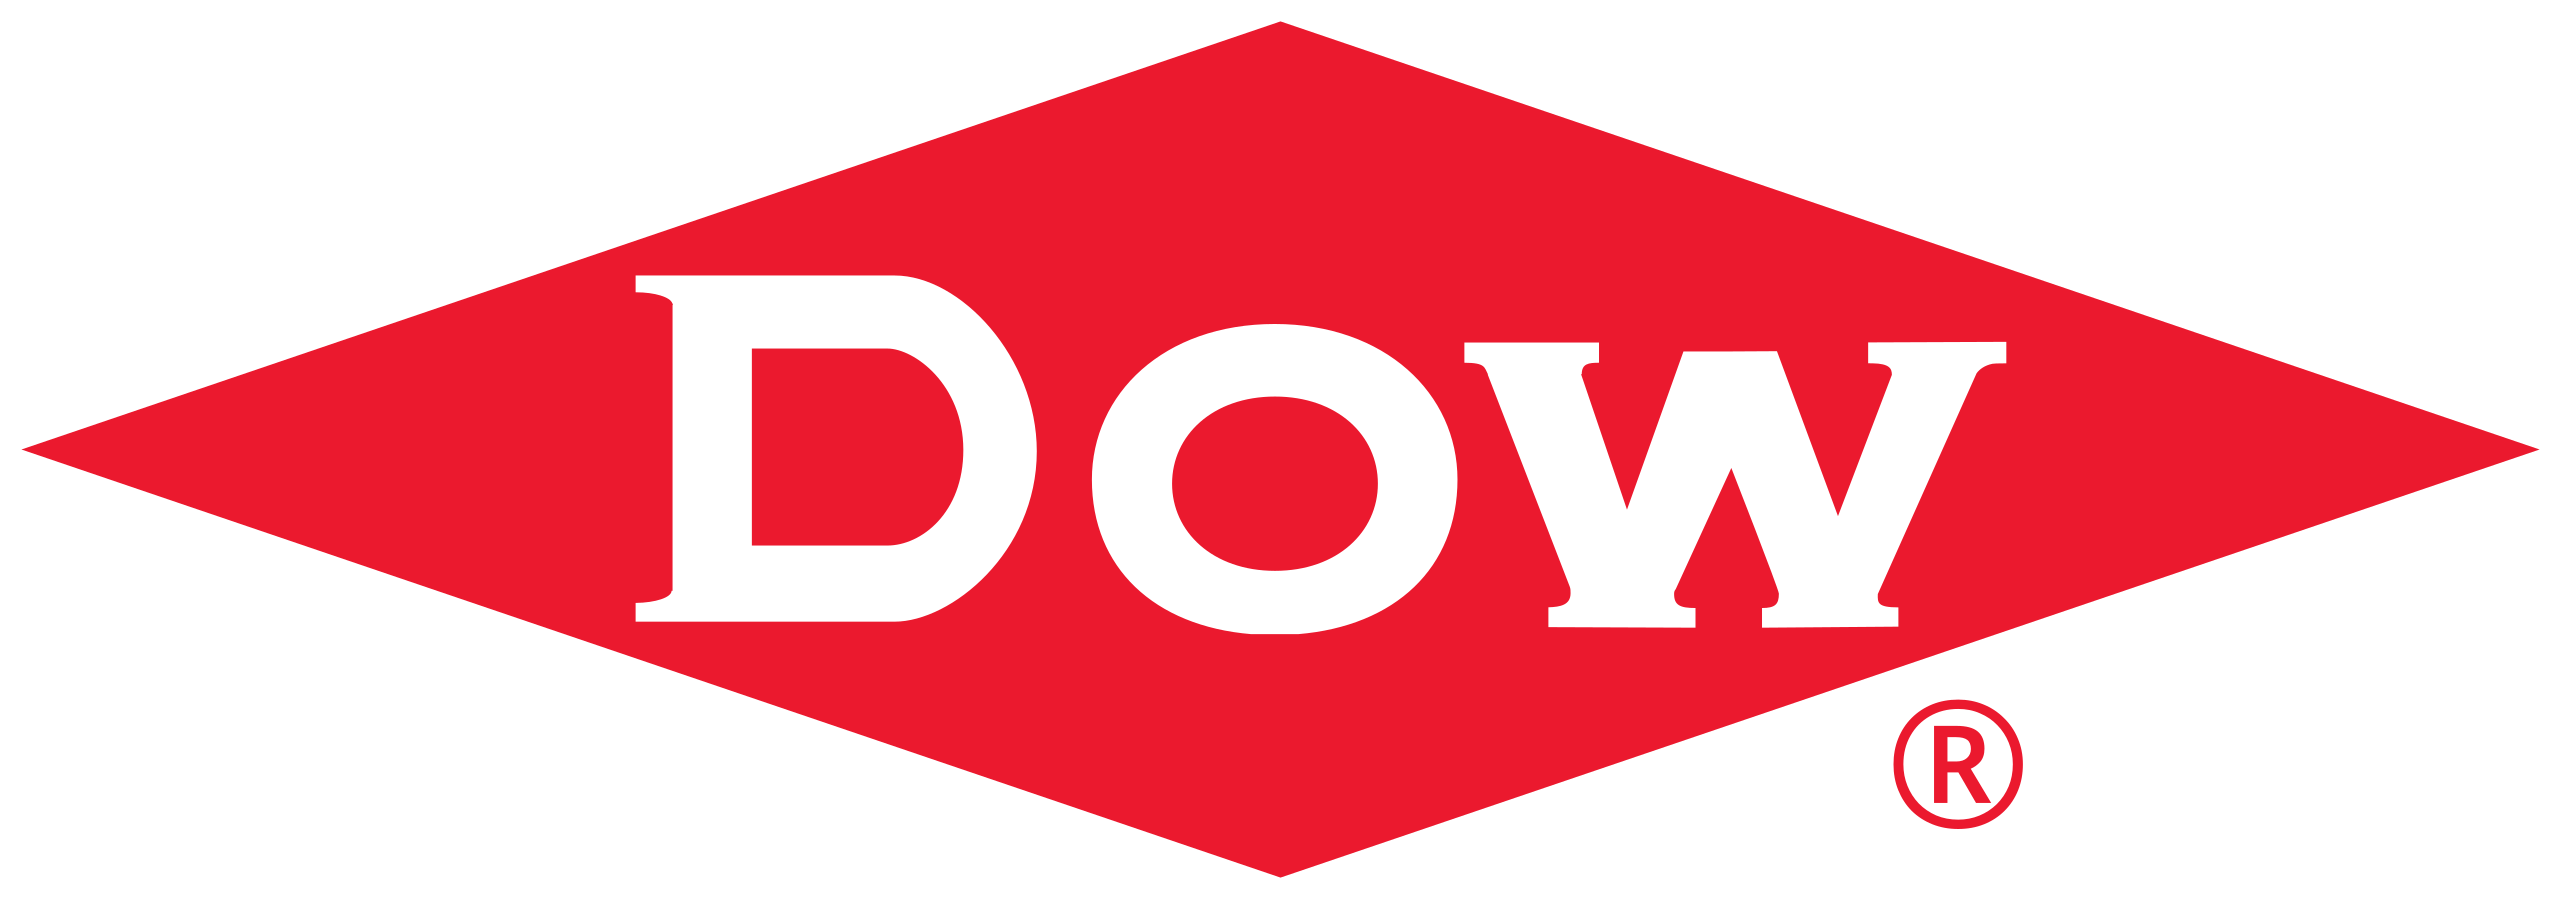 File:Dow Chemical Company logo.svg - Wikimedia Commons